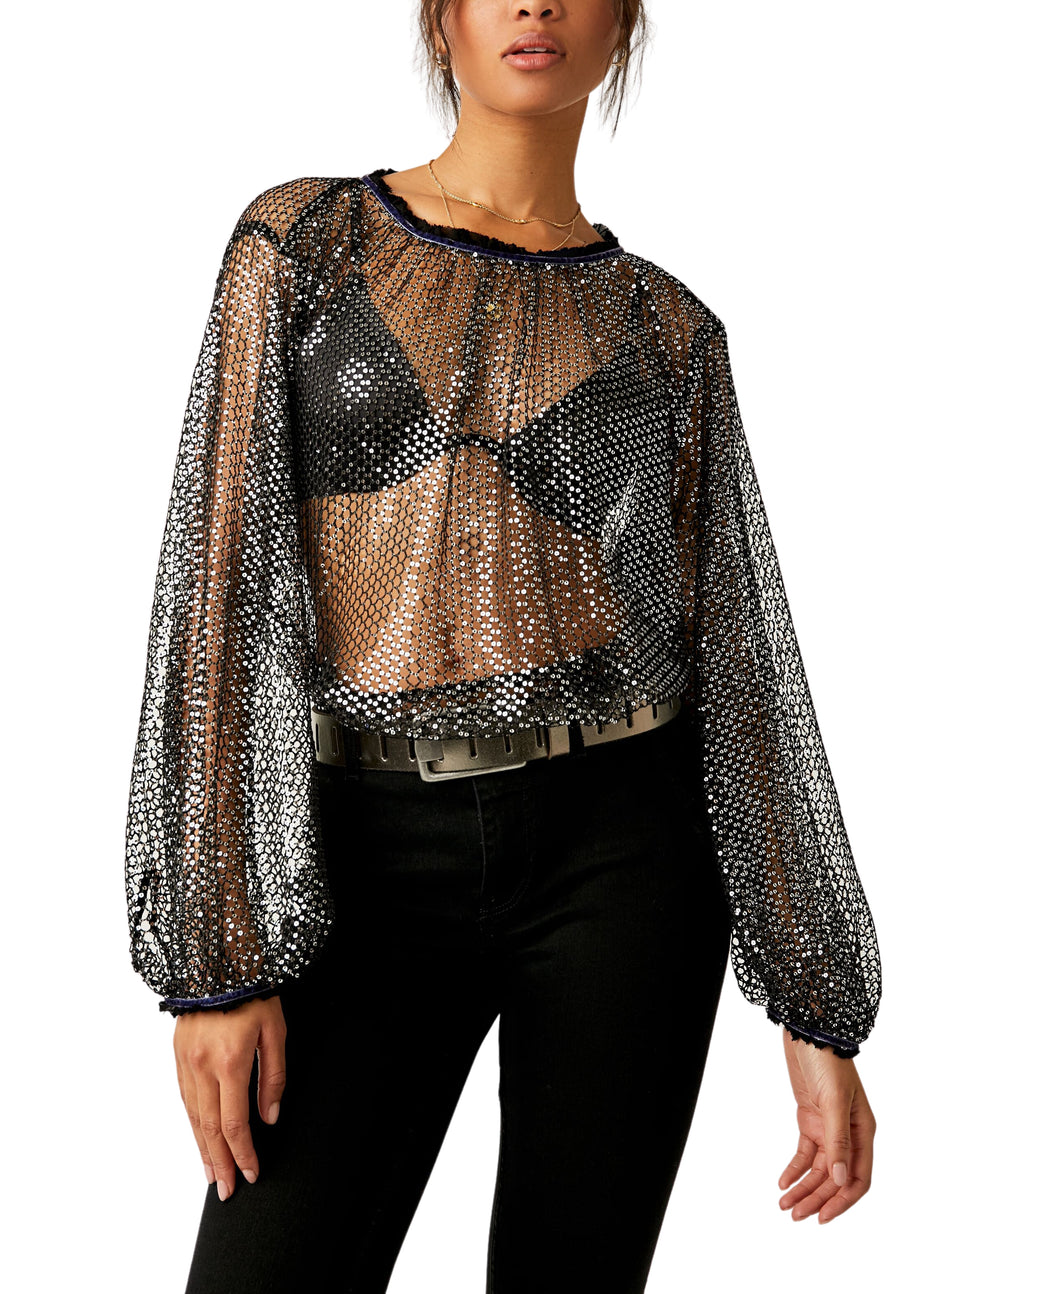 Sparks Fly Sequin Top